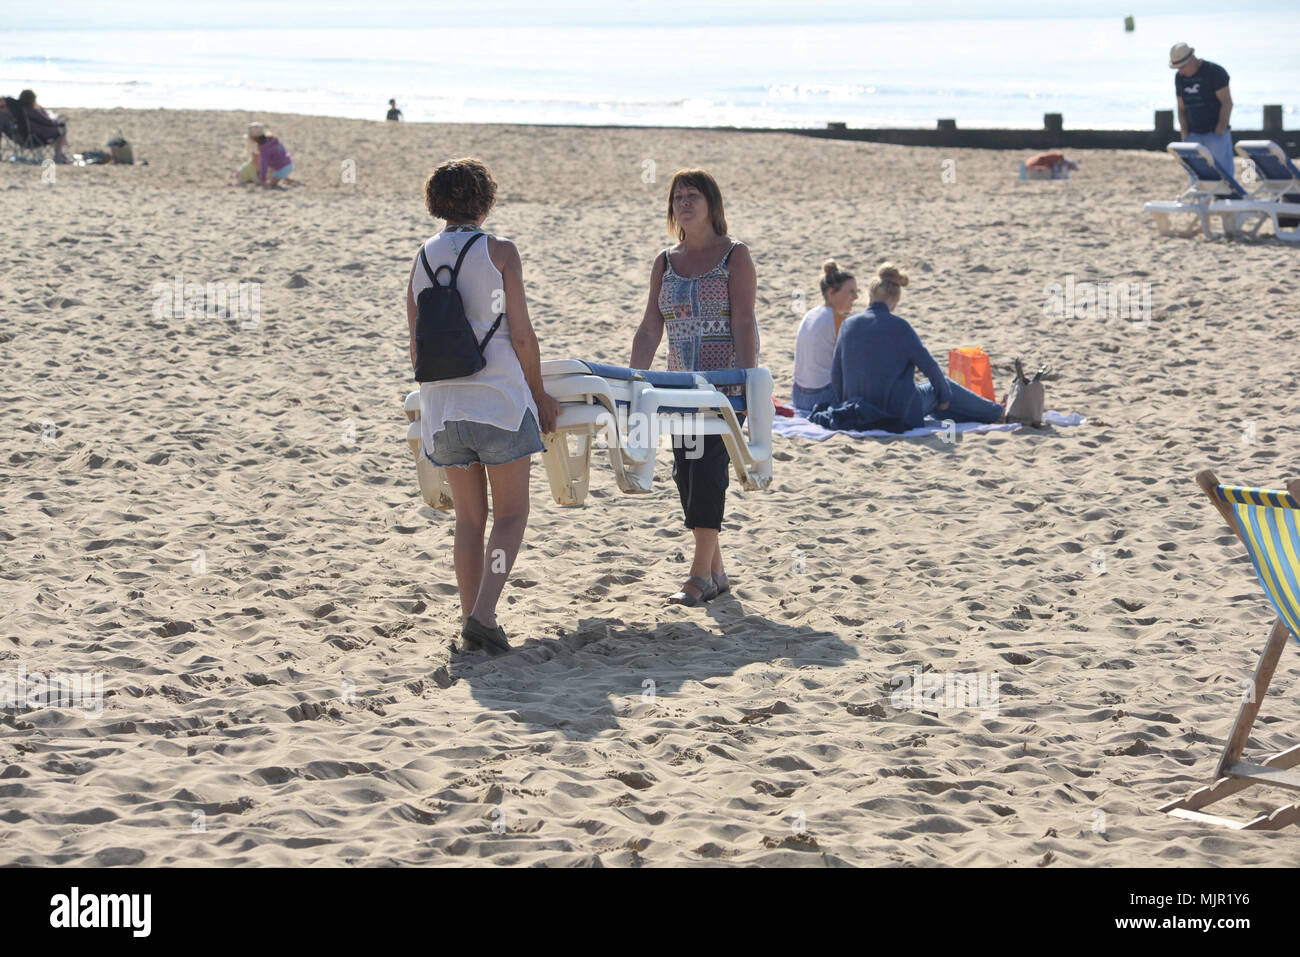 Boscombe, Bournemouth, Dorset, UK, 6th May 2018, Weather: Morning sunshine on the south coast on what could be the hottest Mayday bank holiday weekend on record. Two women carrying sunbeds onto the beach. Stock Photo